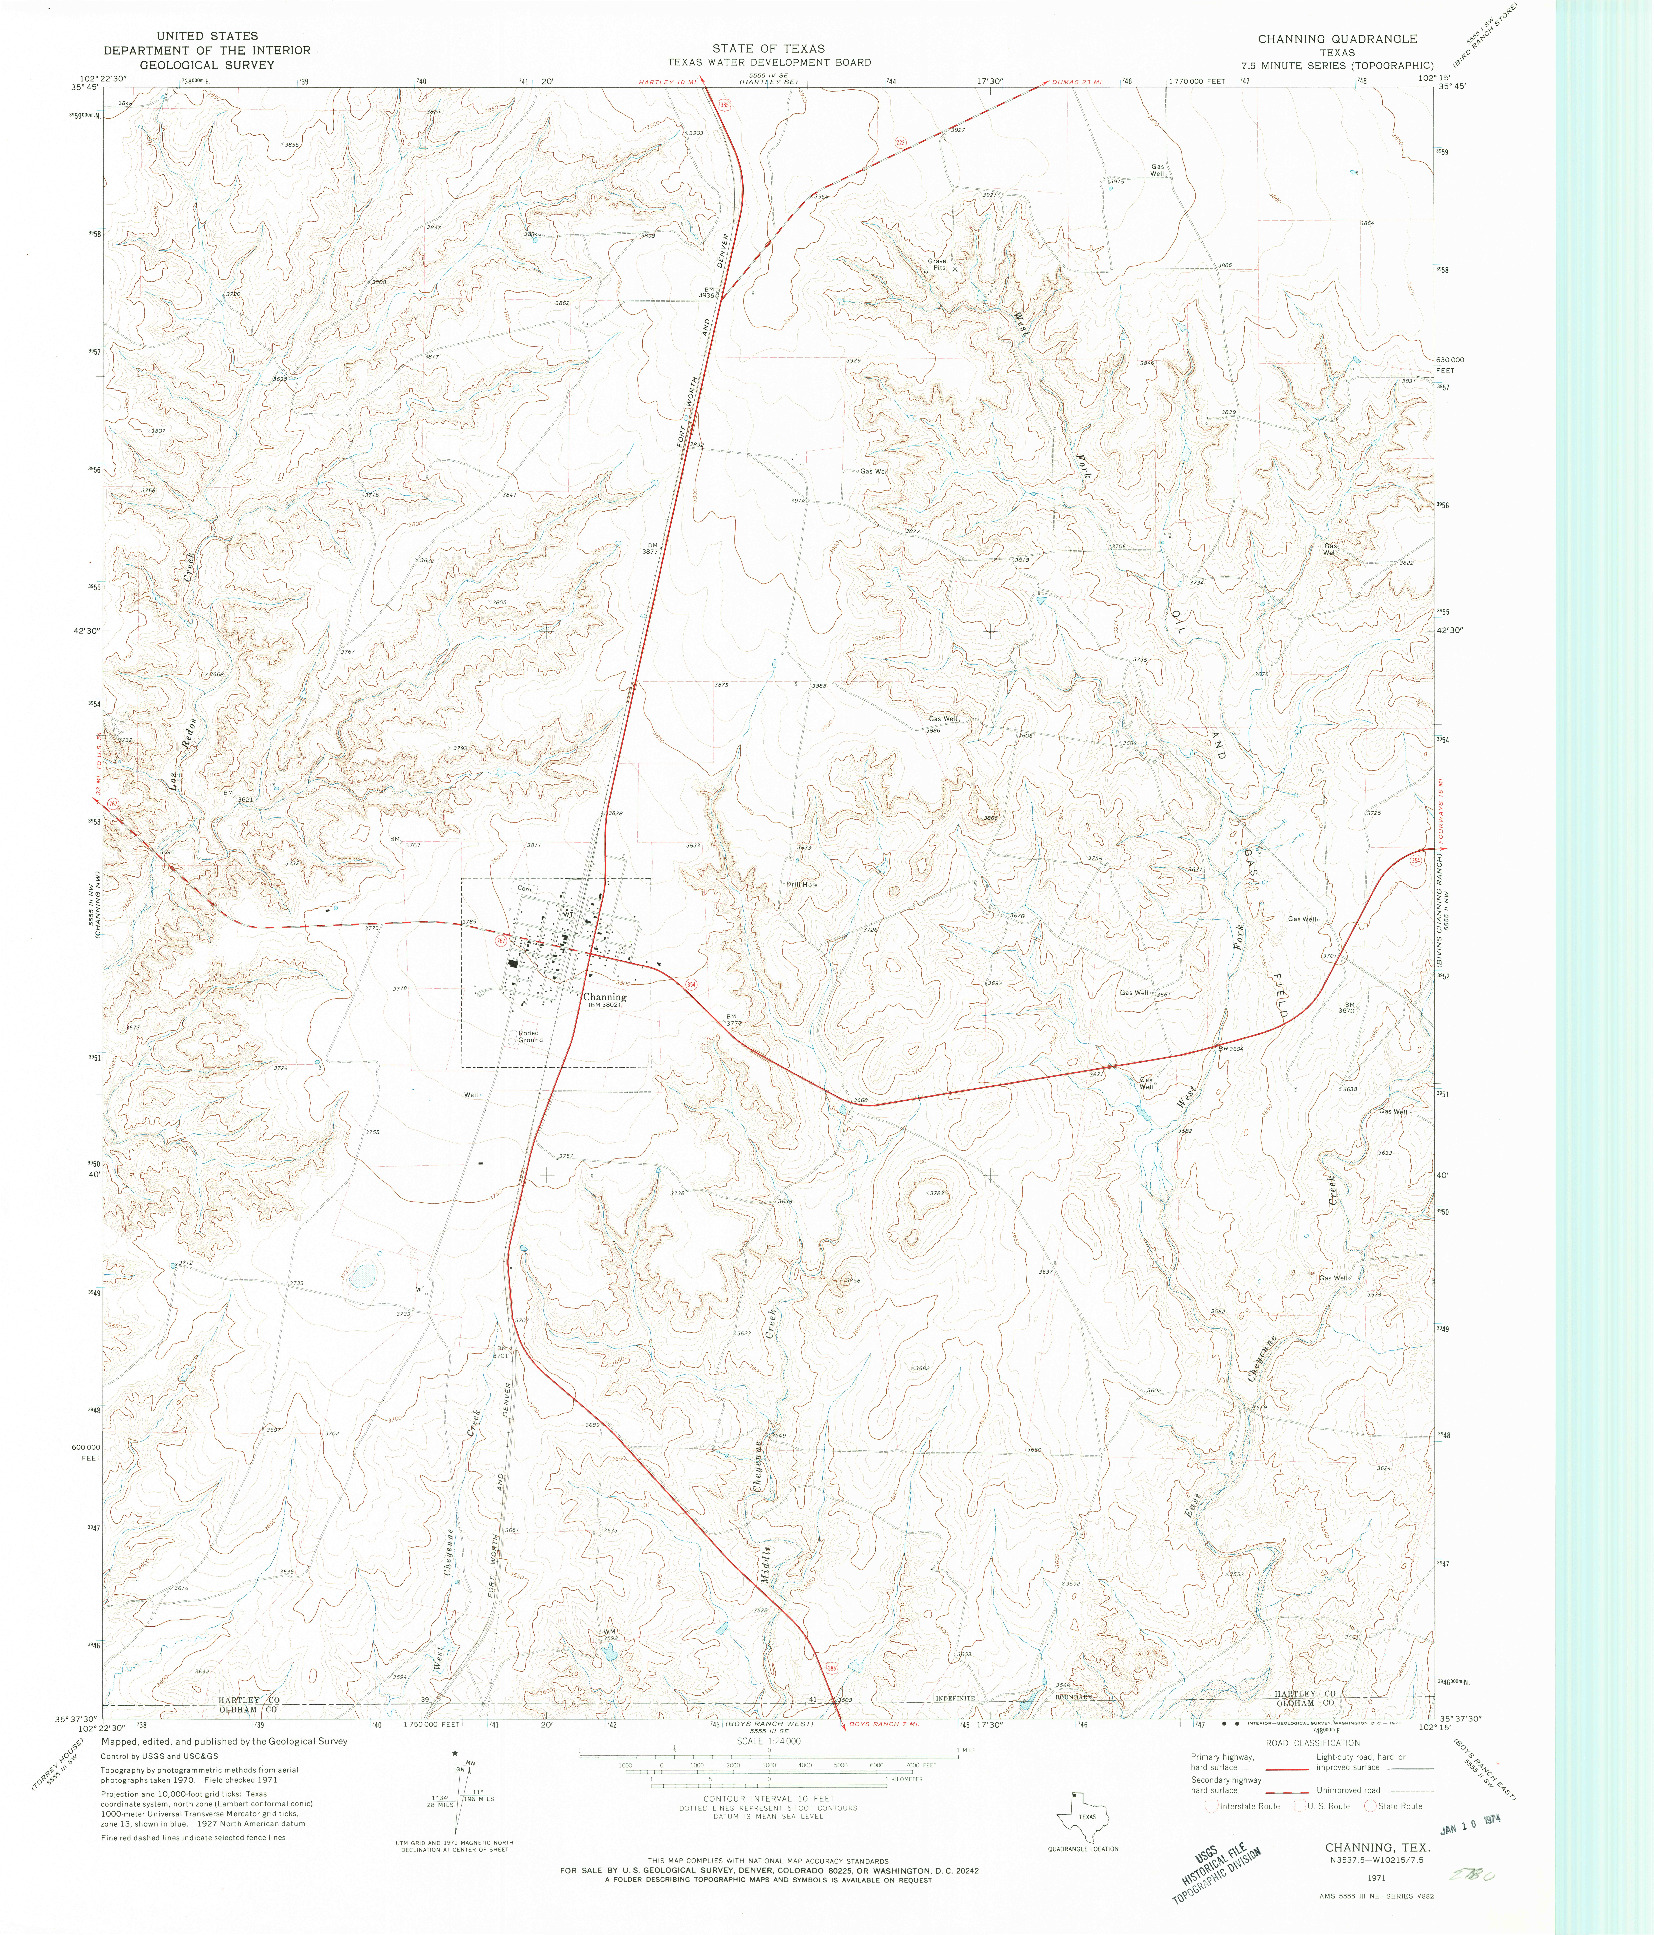 USGS 1:24000-SCALE QUADRANGLE FOR CHANNING, TX 1971